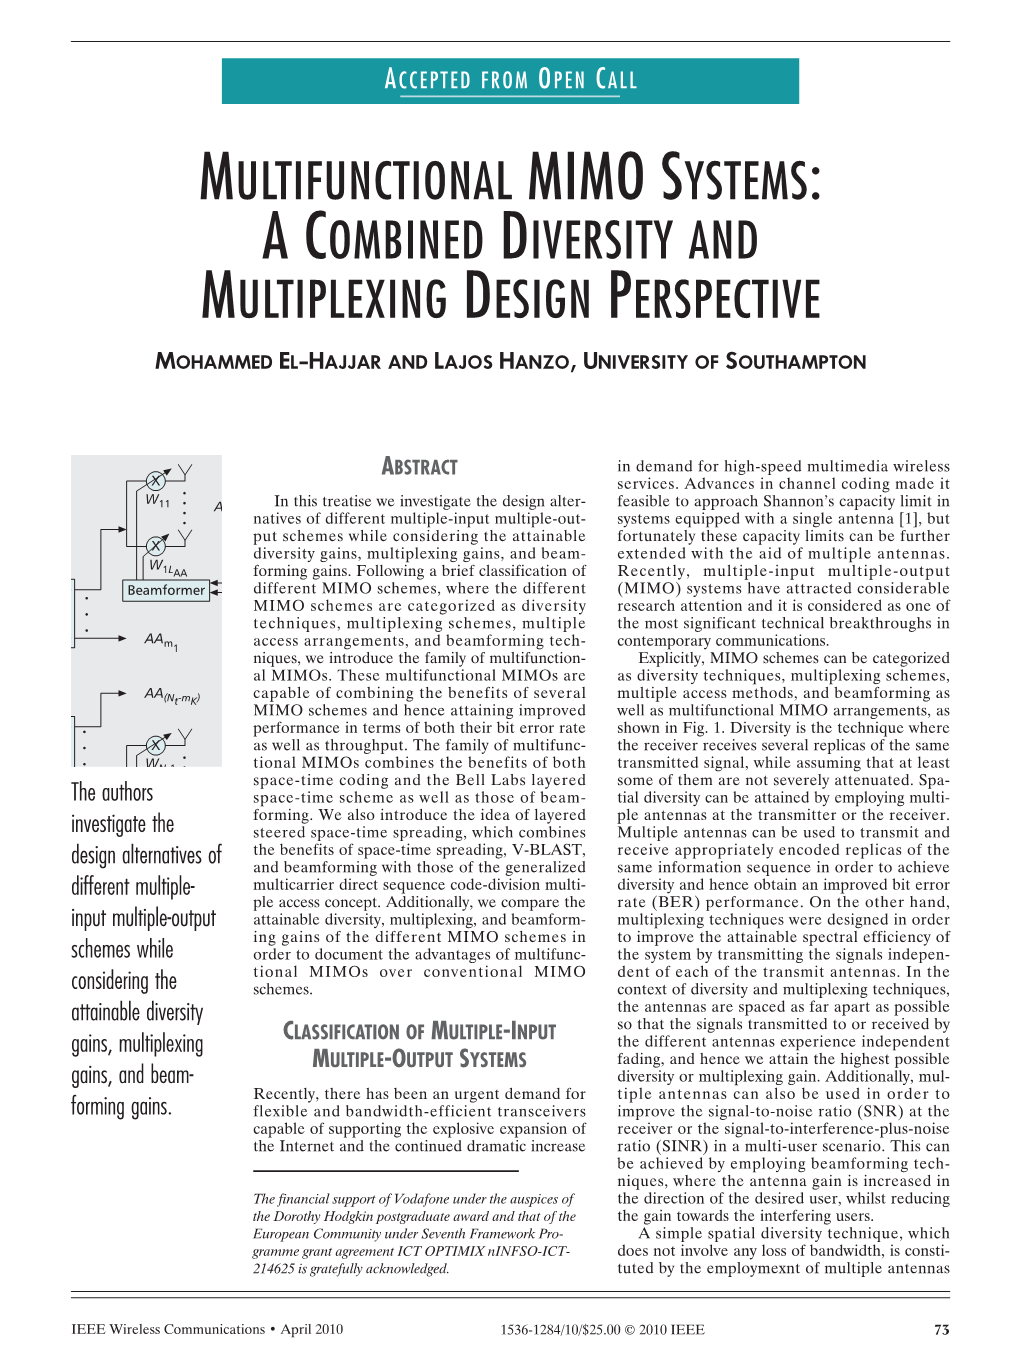 Multifunctional Mimo Systems: a Combined Diversity and Multiplexing Design Perspective